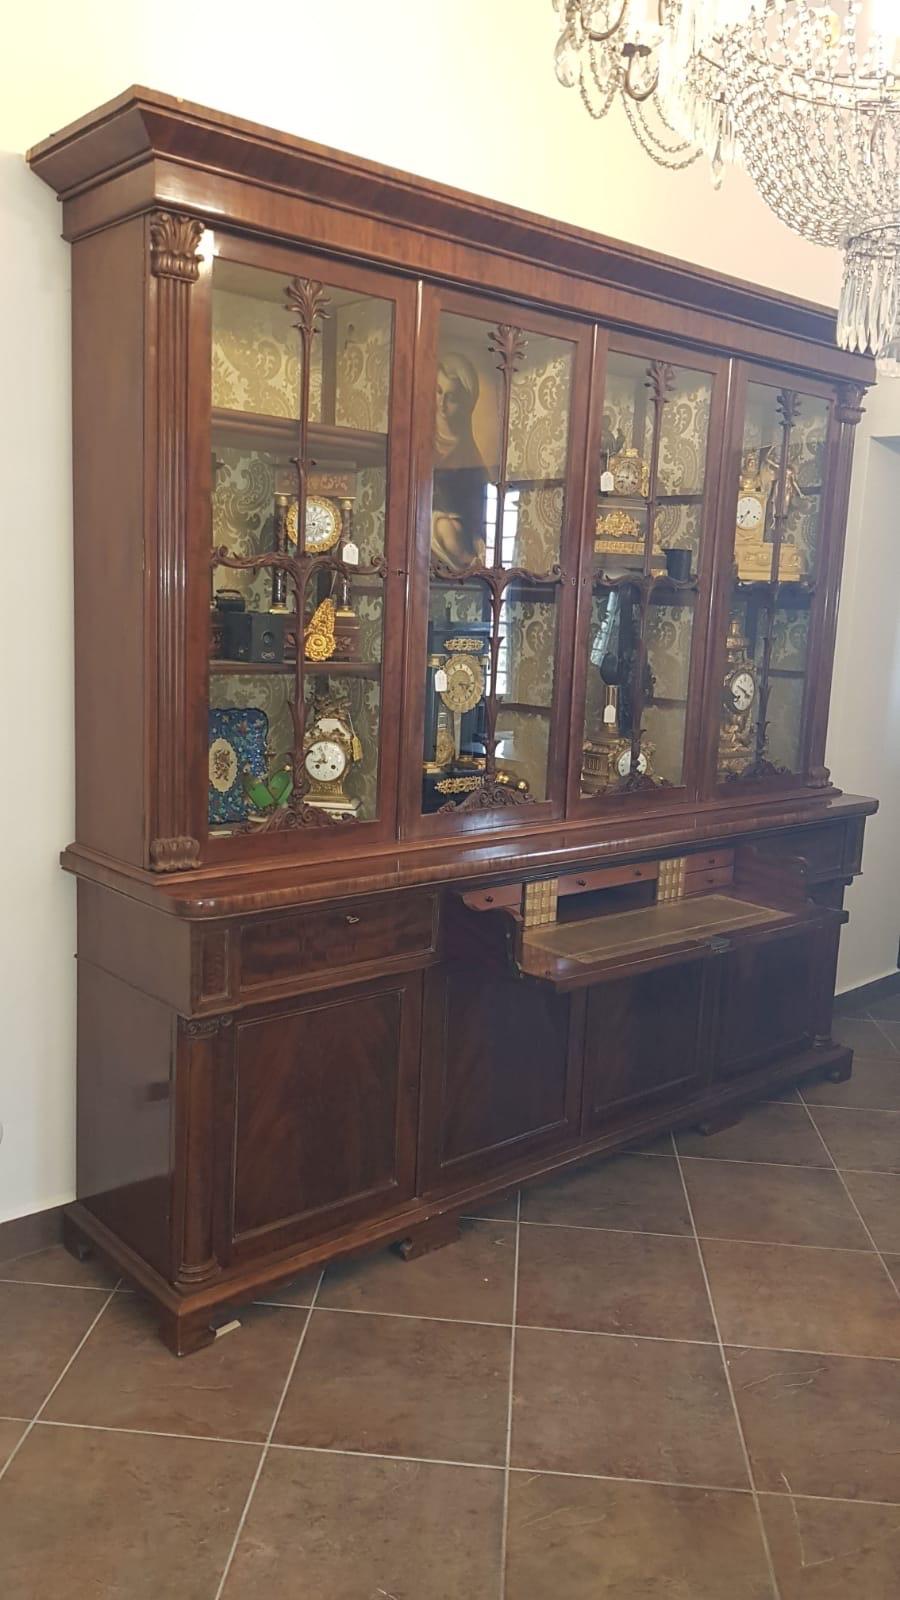 Irish bookcase in mahogany and mahogany feather, with carved capitals on the uprights of the doors, central flap drawer with internal drawers. Furniture of extreme beauty and proportions that make it a light piece of furniture, not as heavy as some